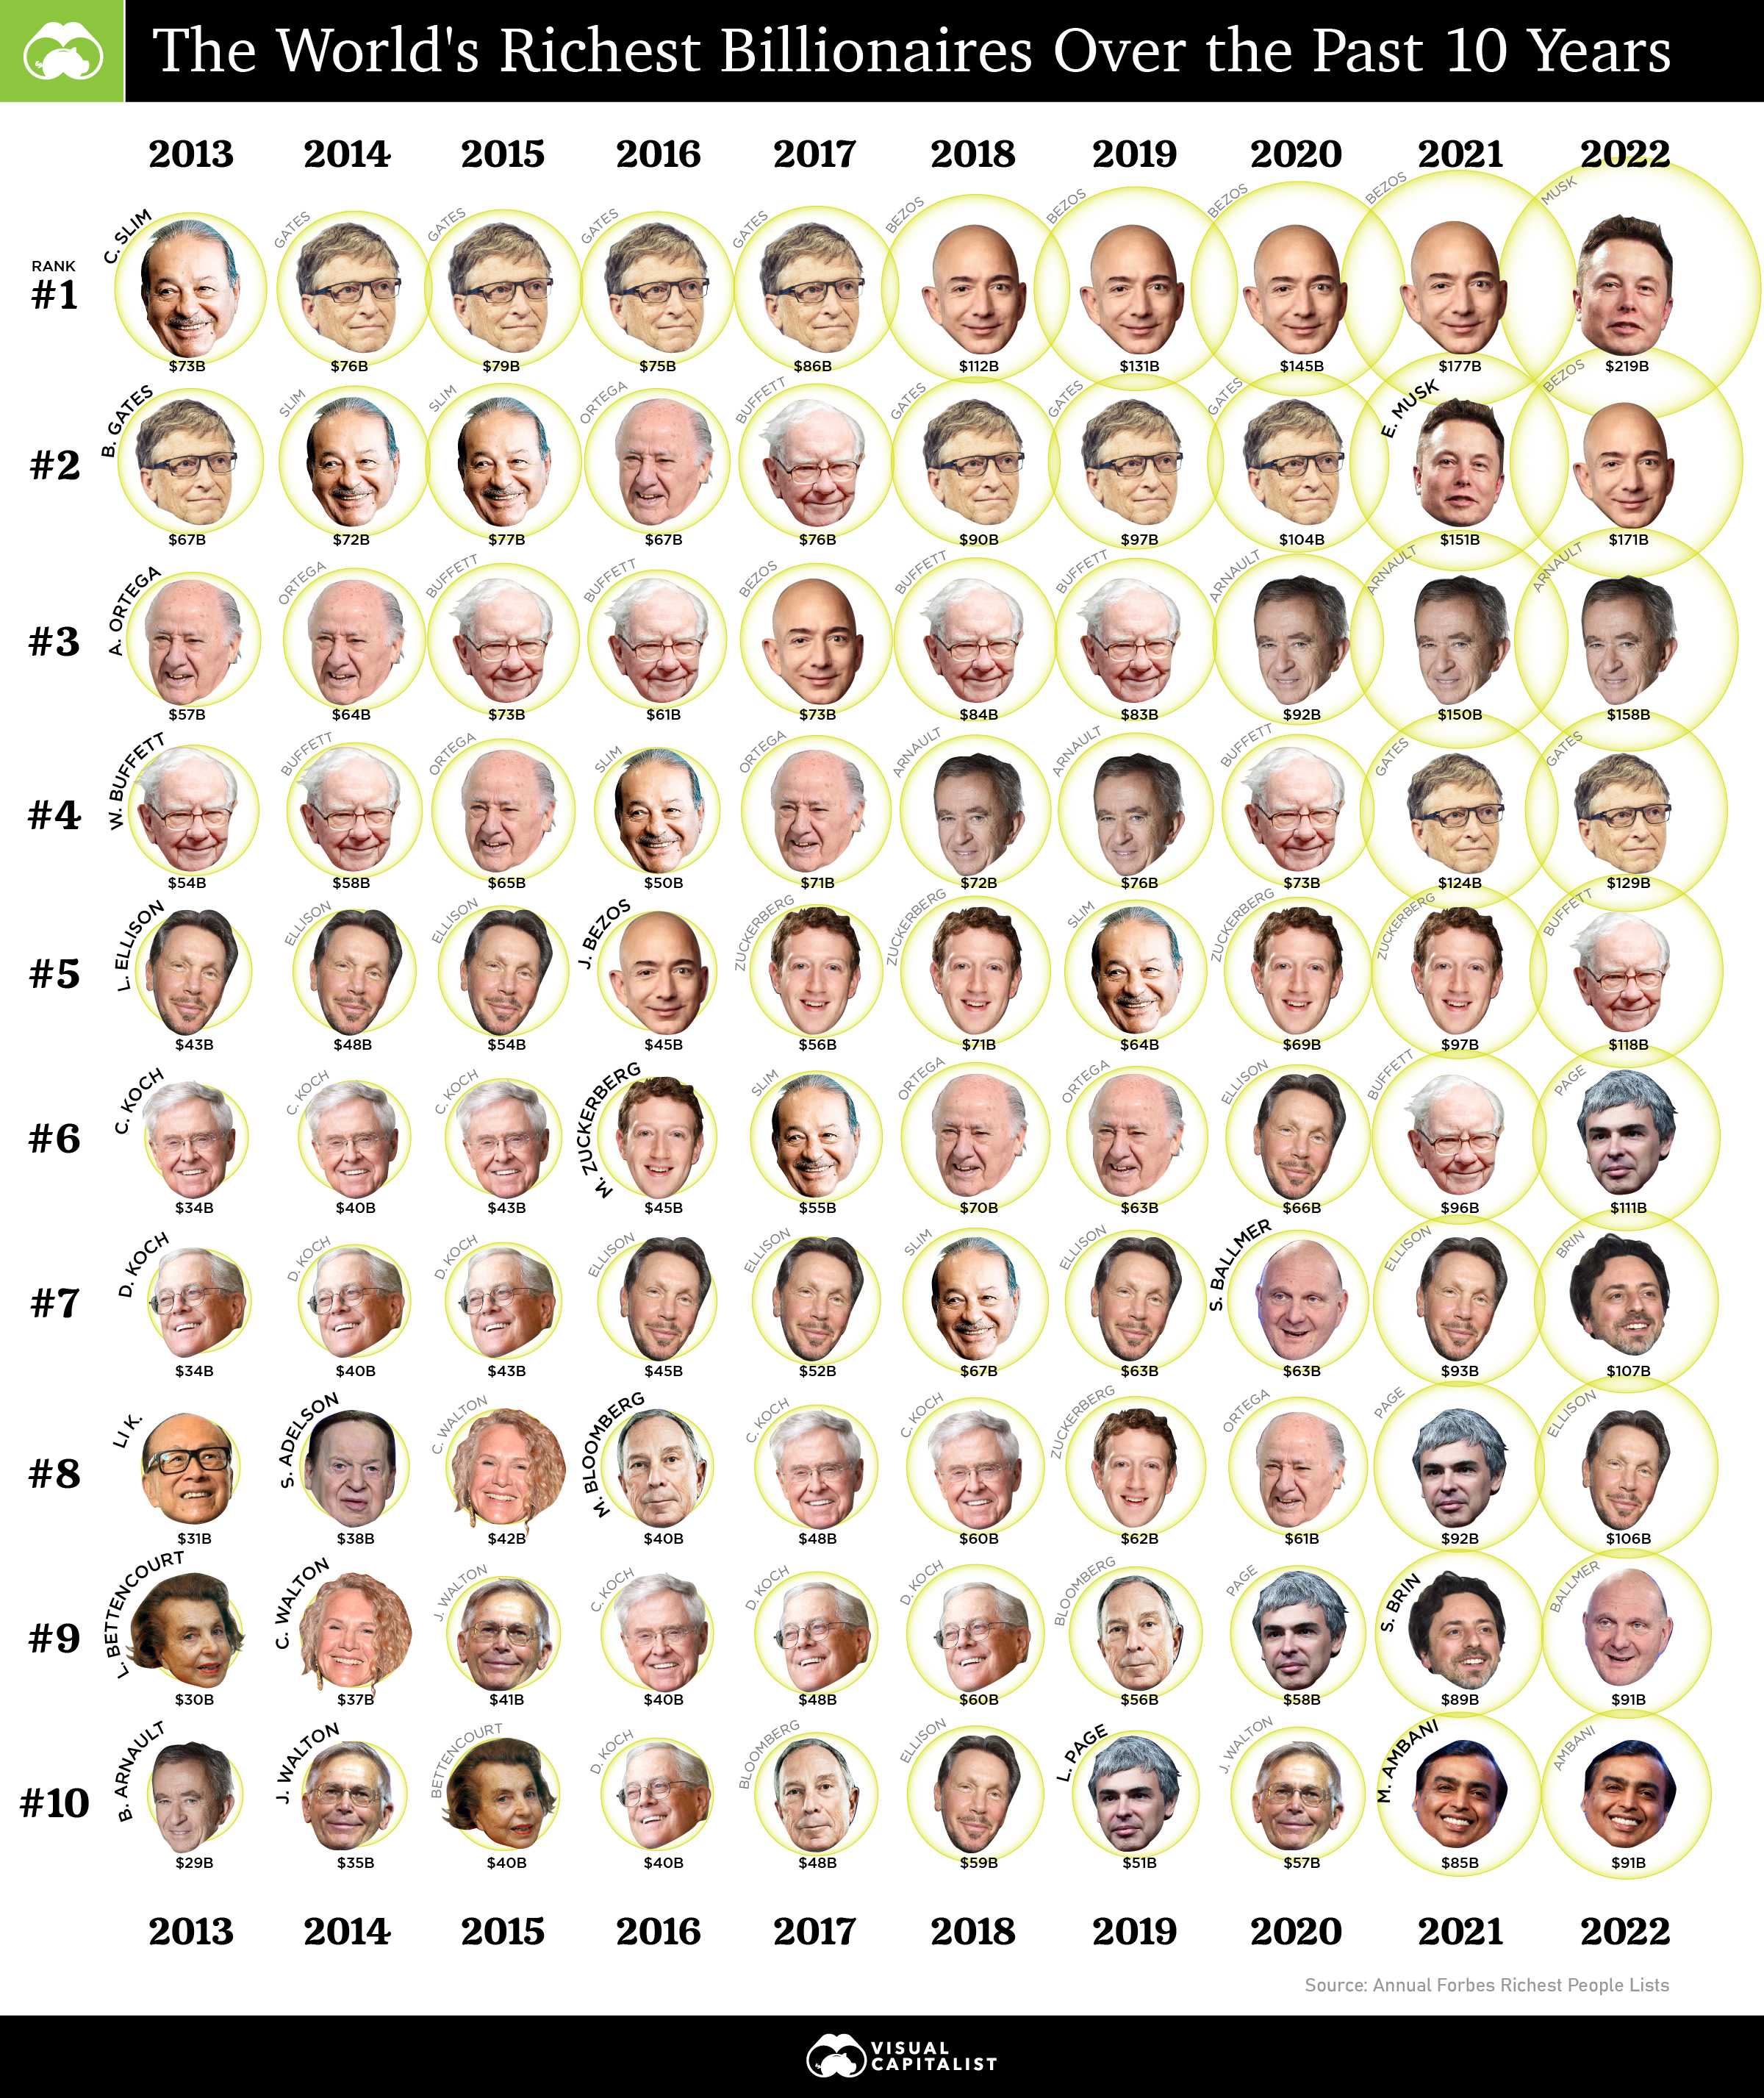 Infographic showing the richest billionaires of the past 10 years